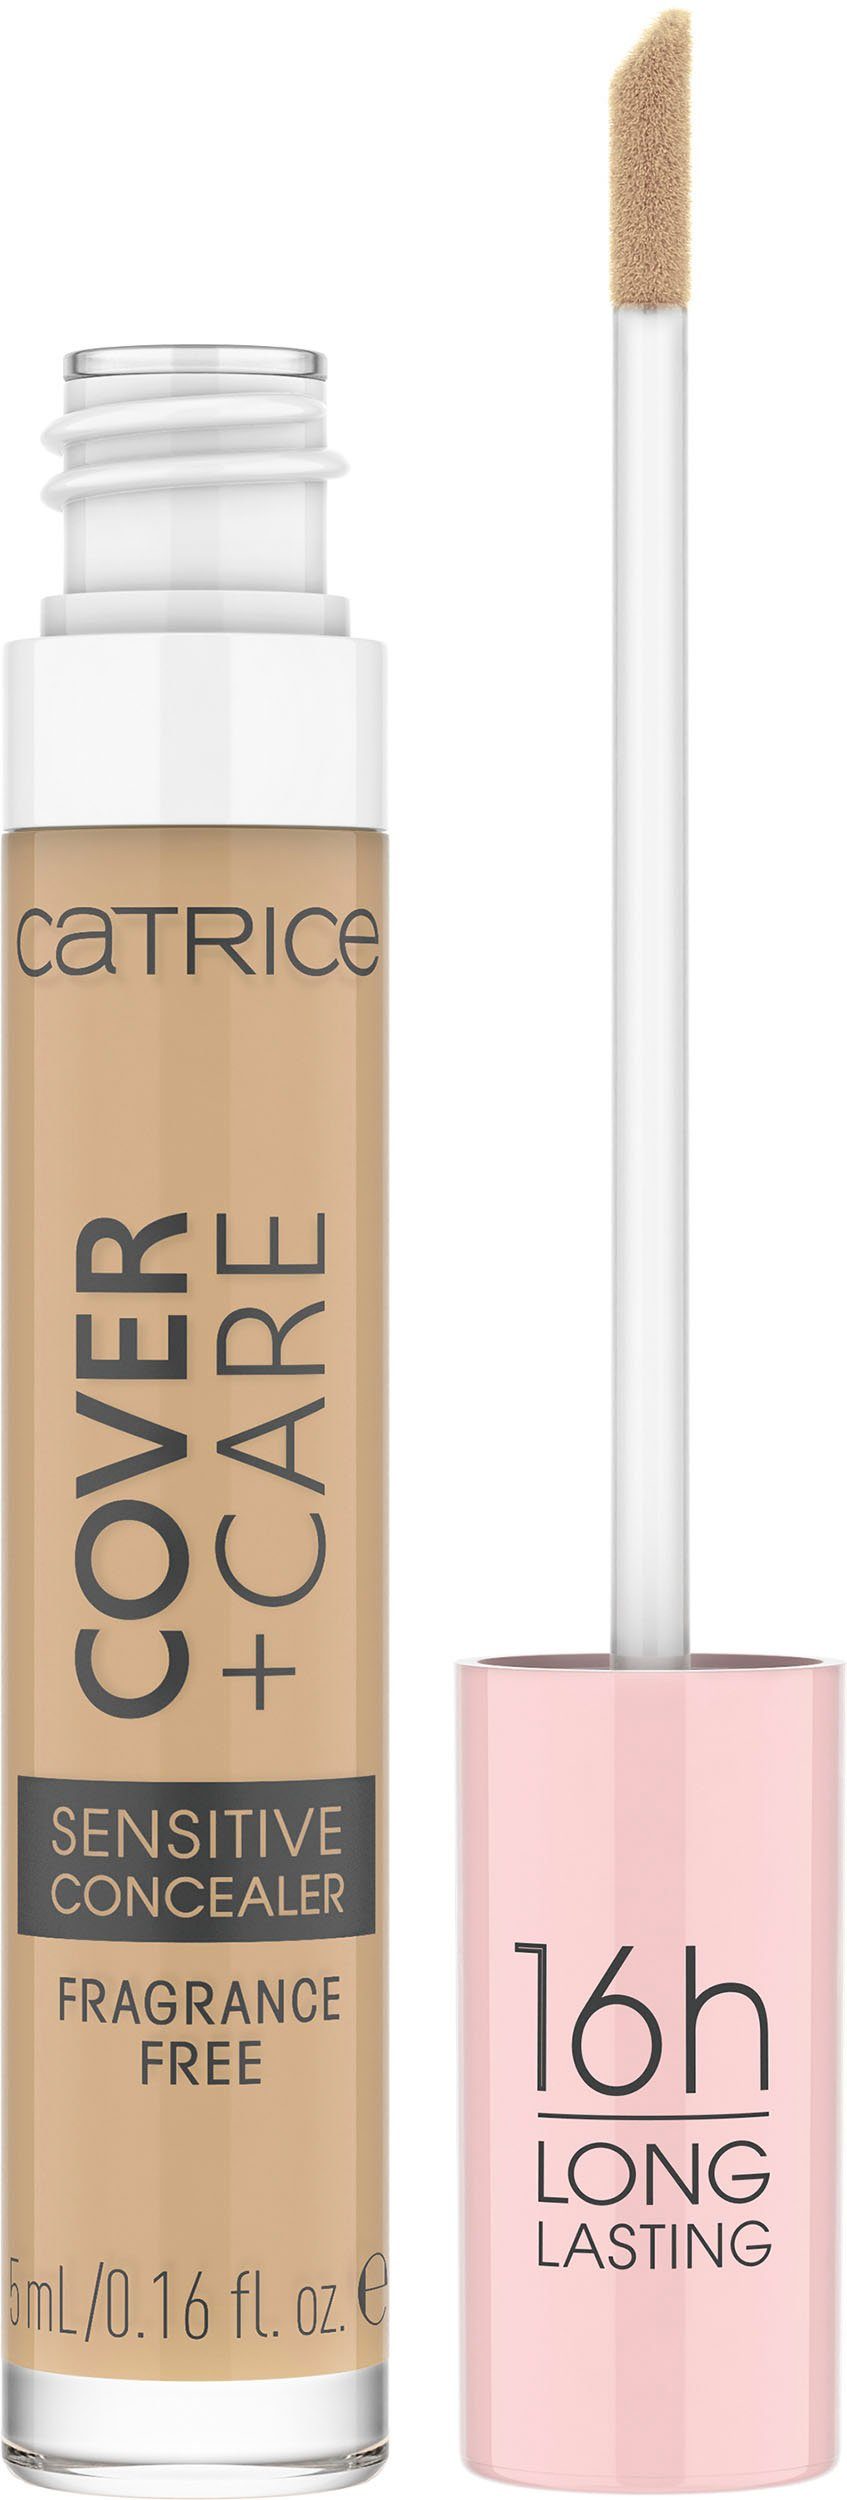 3-tlg. Care Sensitive 030N Concealer, Cover + Catrice nude Concealer Catrice